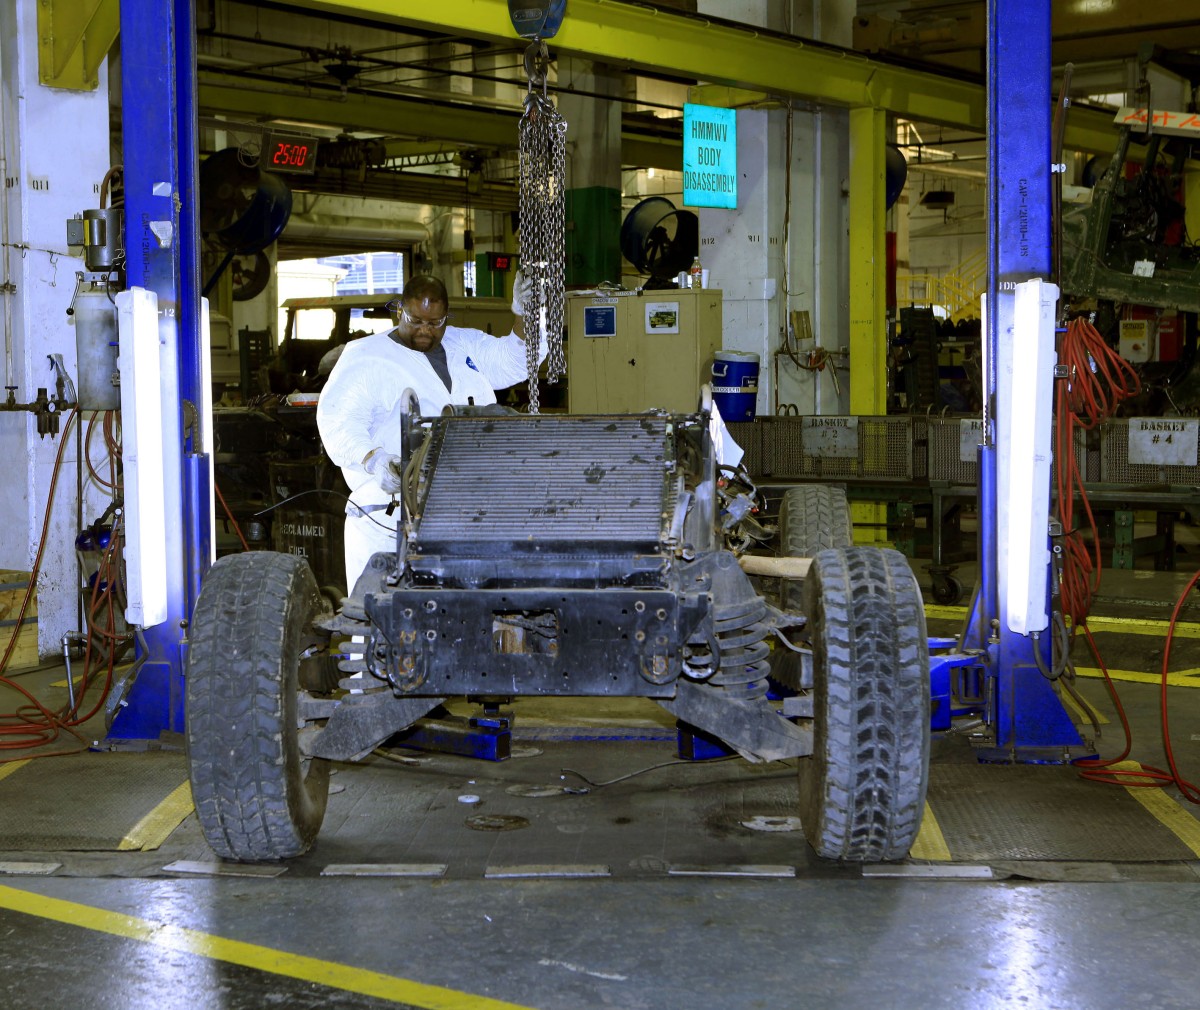 HMMWV Production Reaches New Milestone Article The United States Army